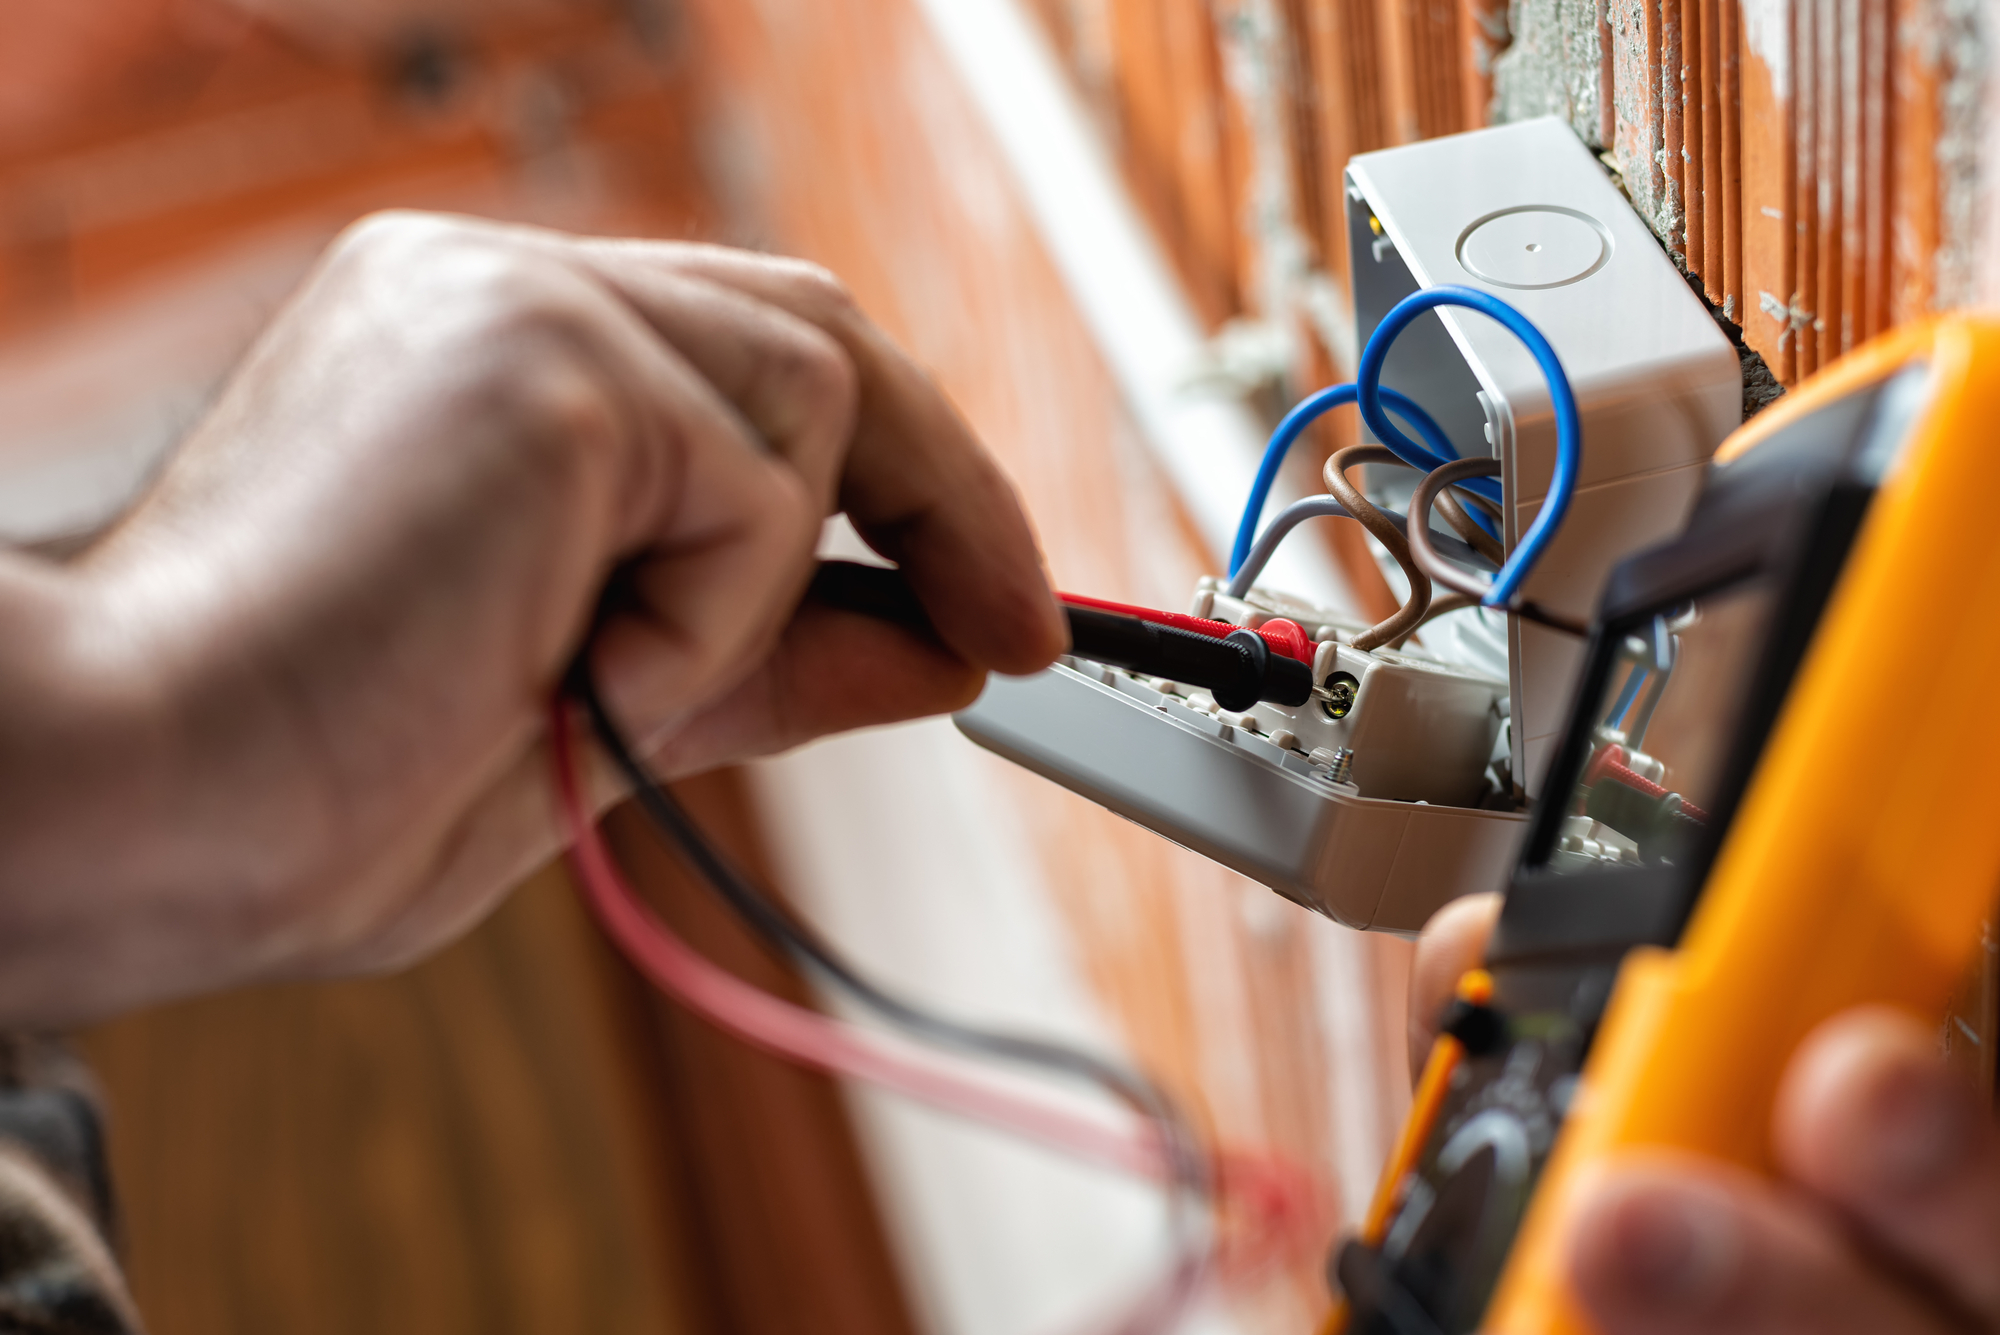 Home Electrical Services